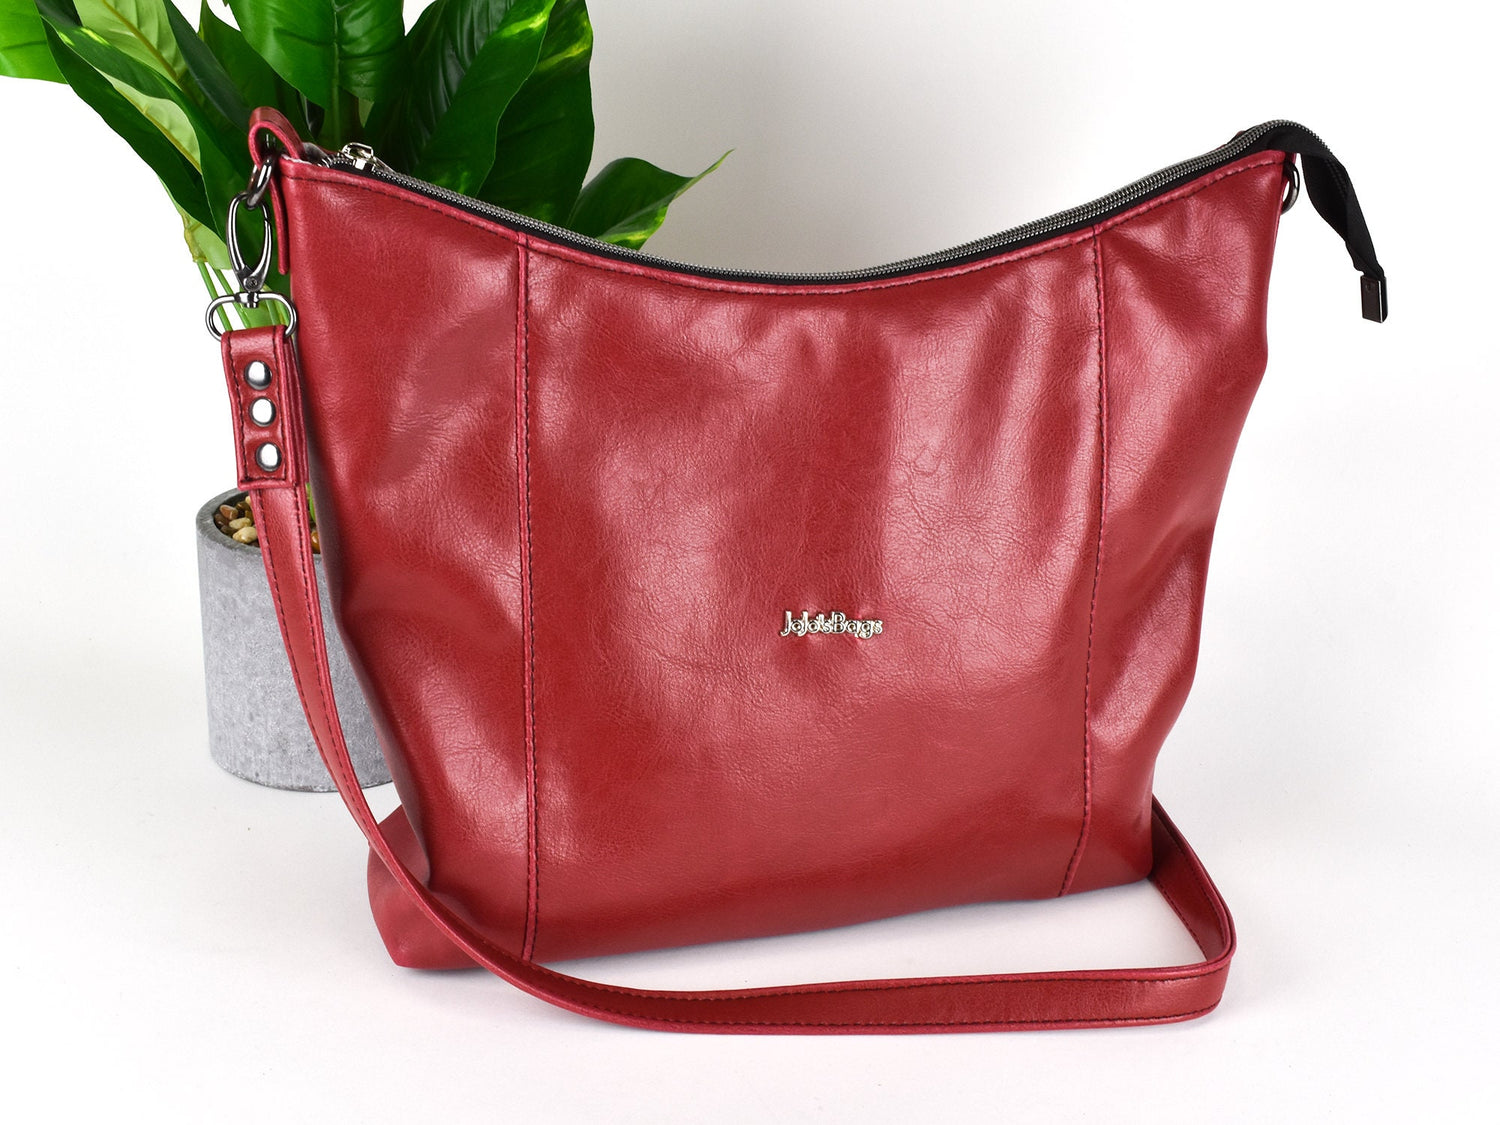 Designer Leather Beige Hobo Bag Shoulder Bag For Women Aphrodite Retro Style  With New Letters Street Fashion Purse From Pink_luggage, $63.83 | DHgate.Com